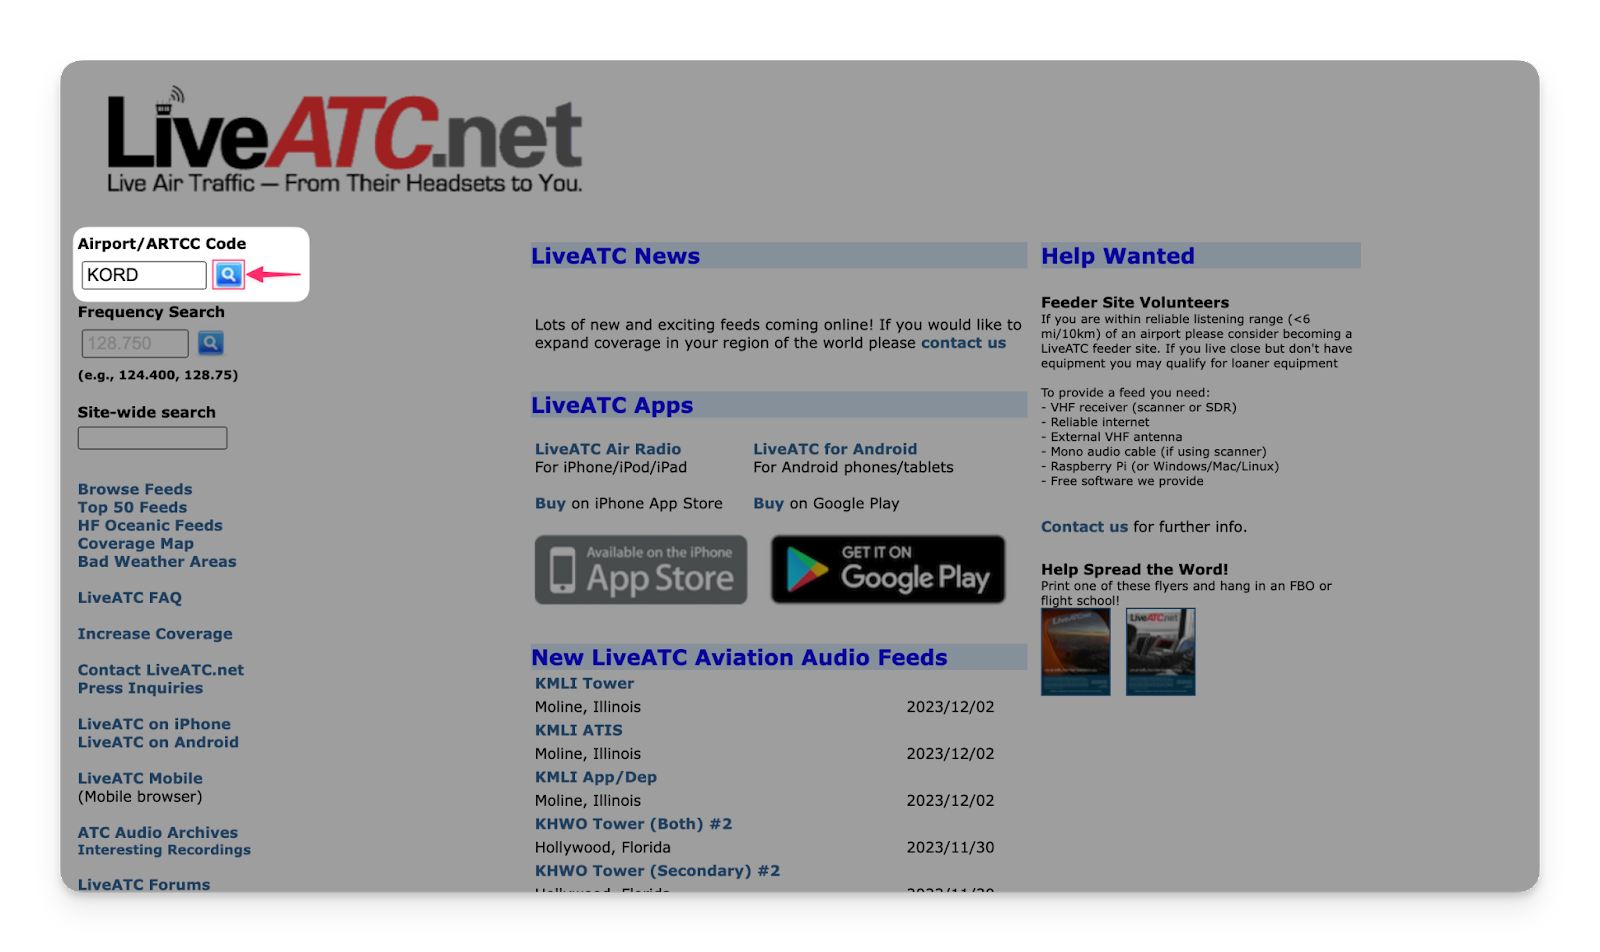 A screenshot of the LiveATC website with the Airport/ARTCC Code section highlighted. KORD is in the input box.